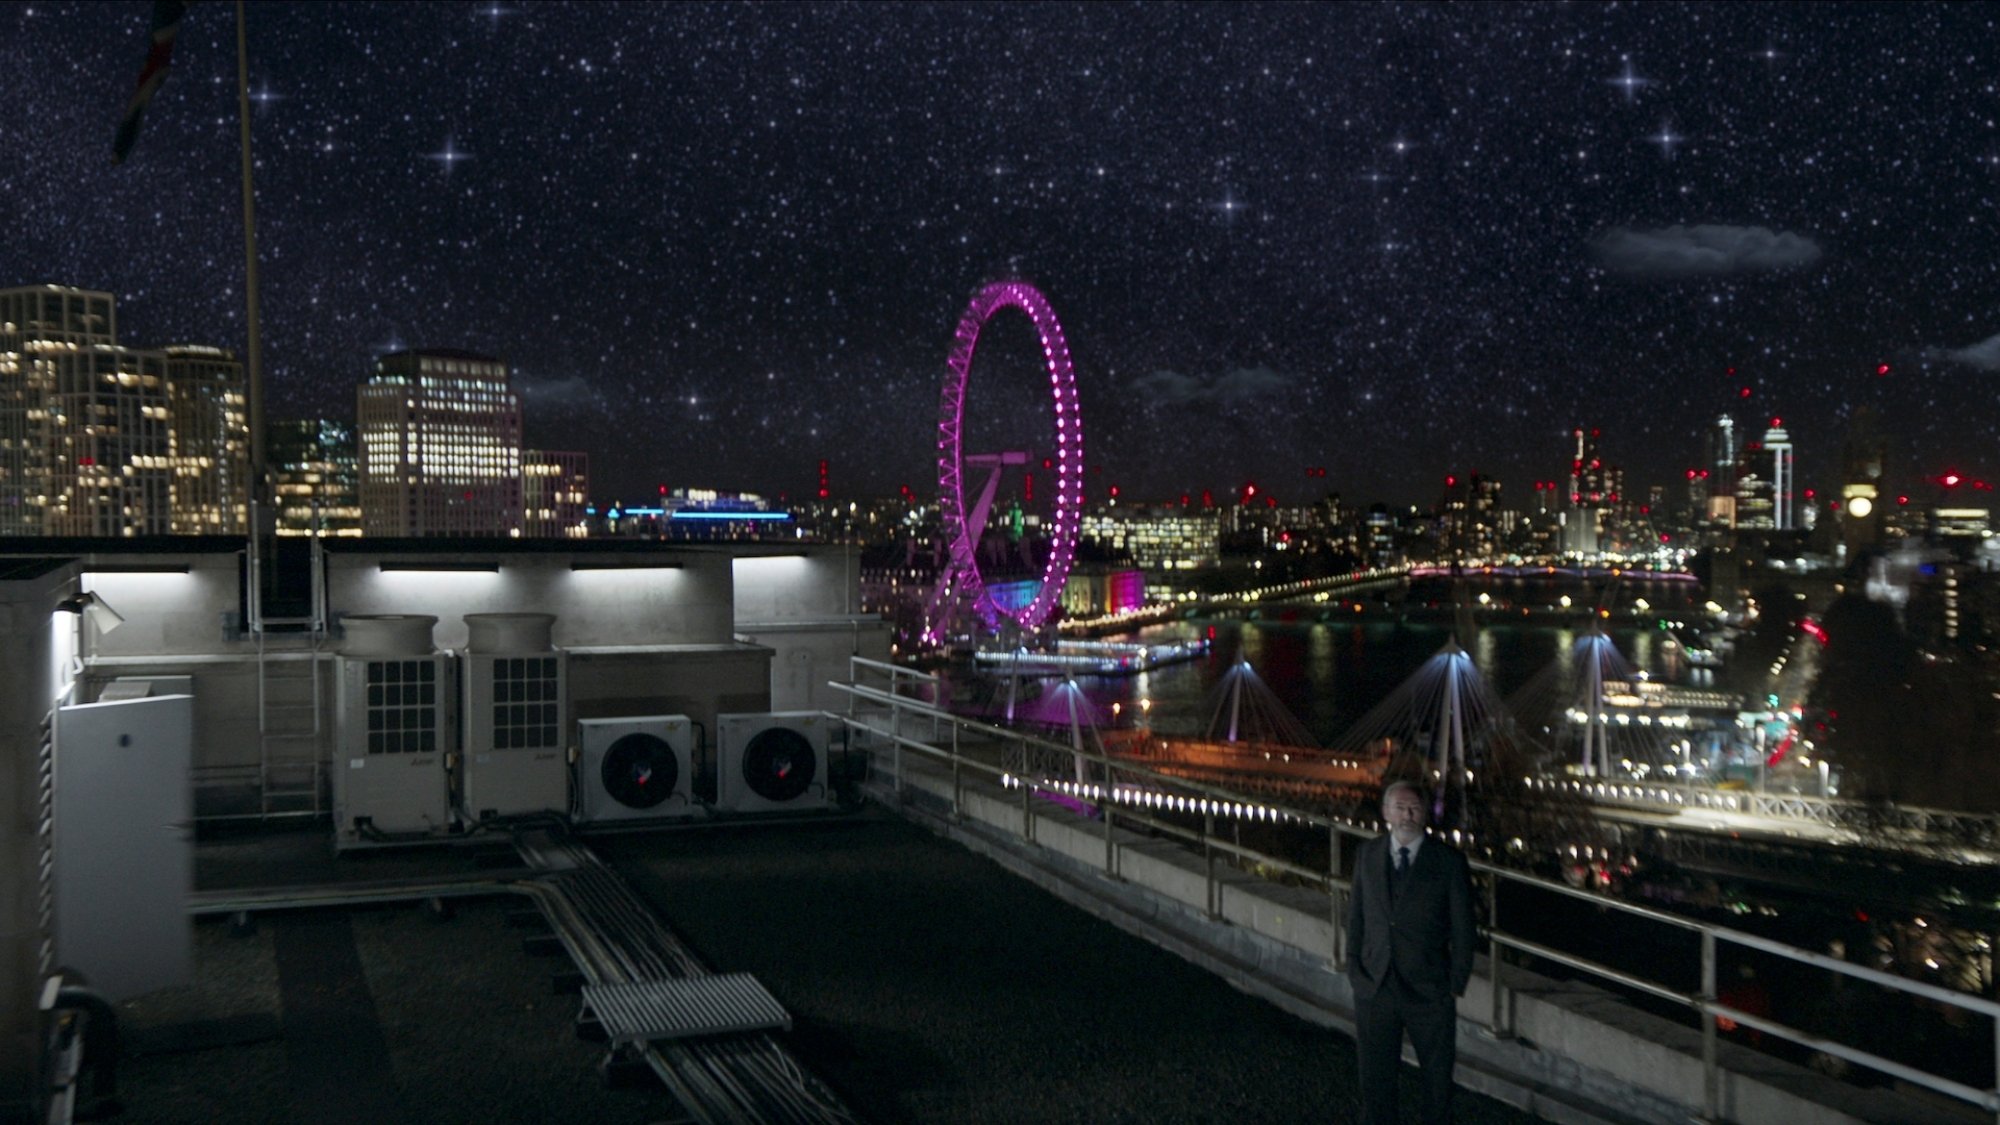 A man stands on a rooftop under the stars with the London skyline in the background.